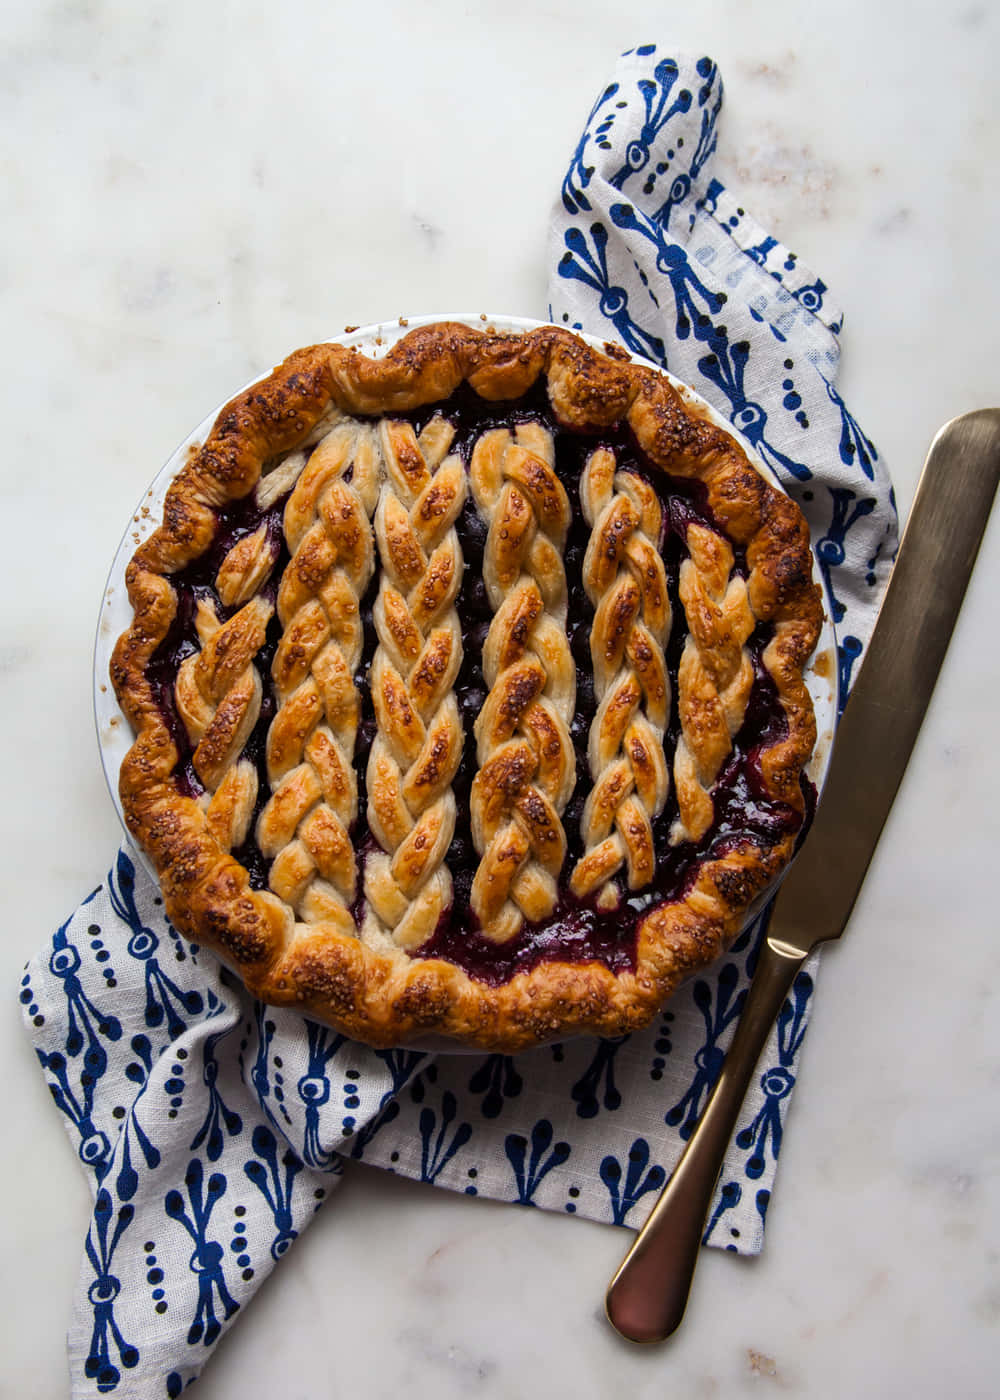 A perfectly-baked blueberry pie, ready for enjoyment! Wallpaper